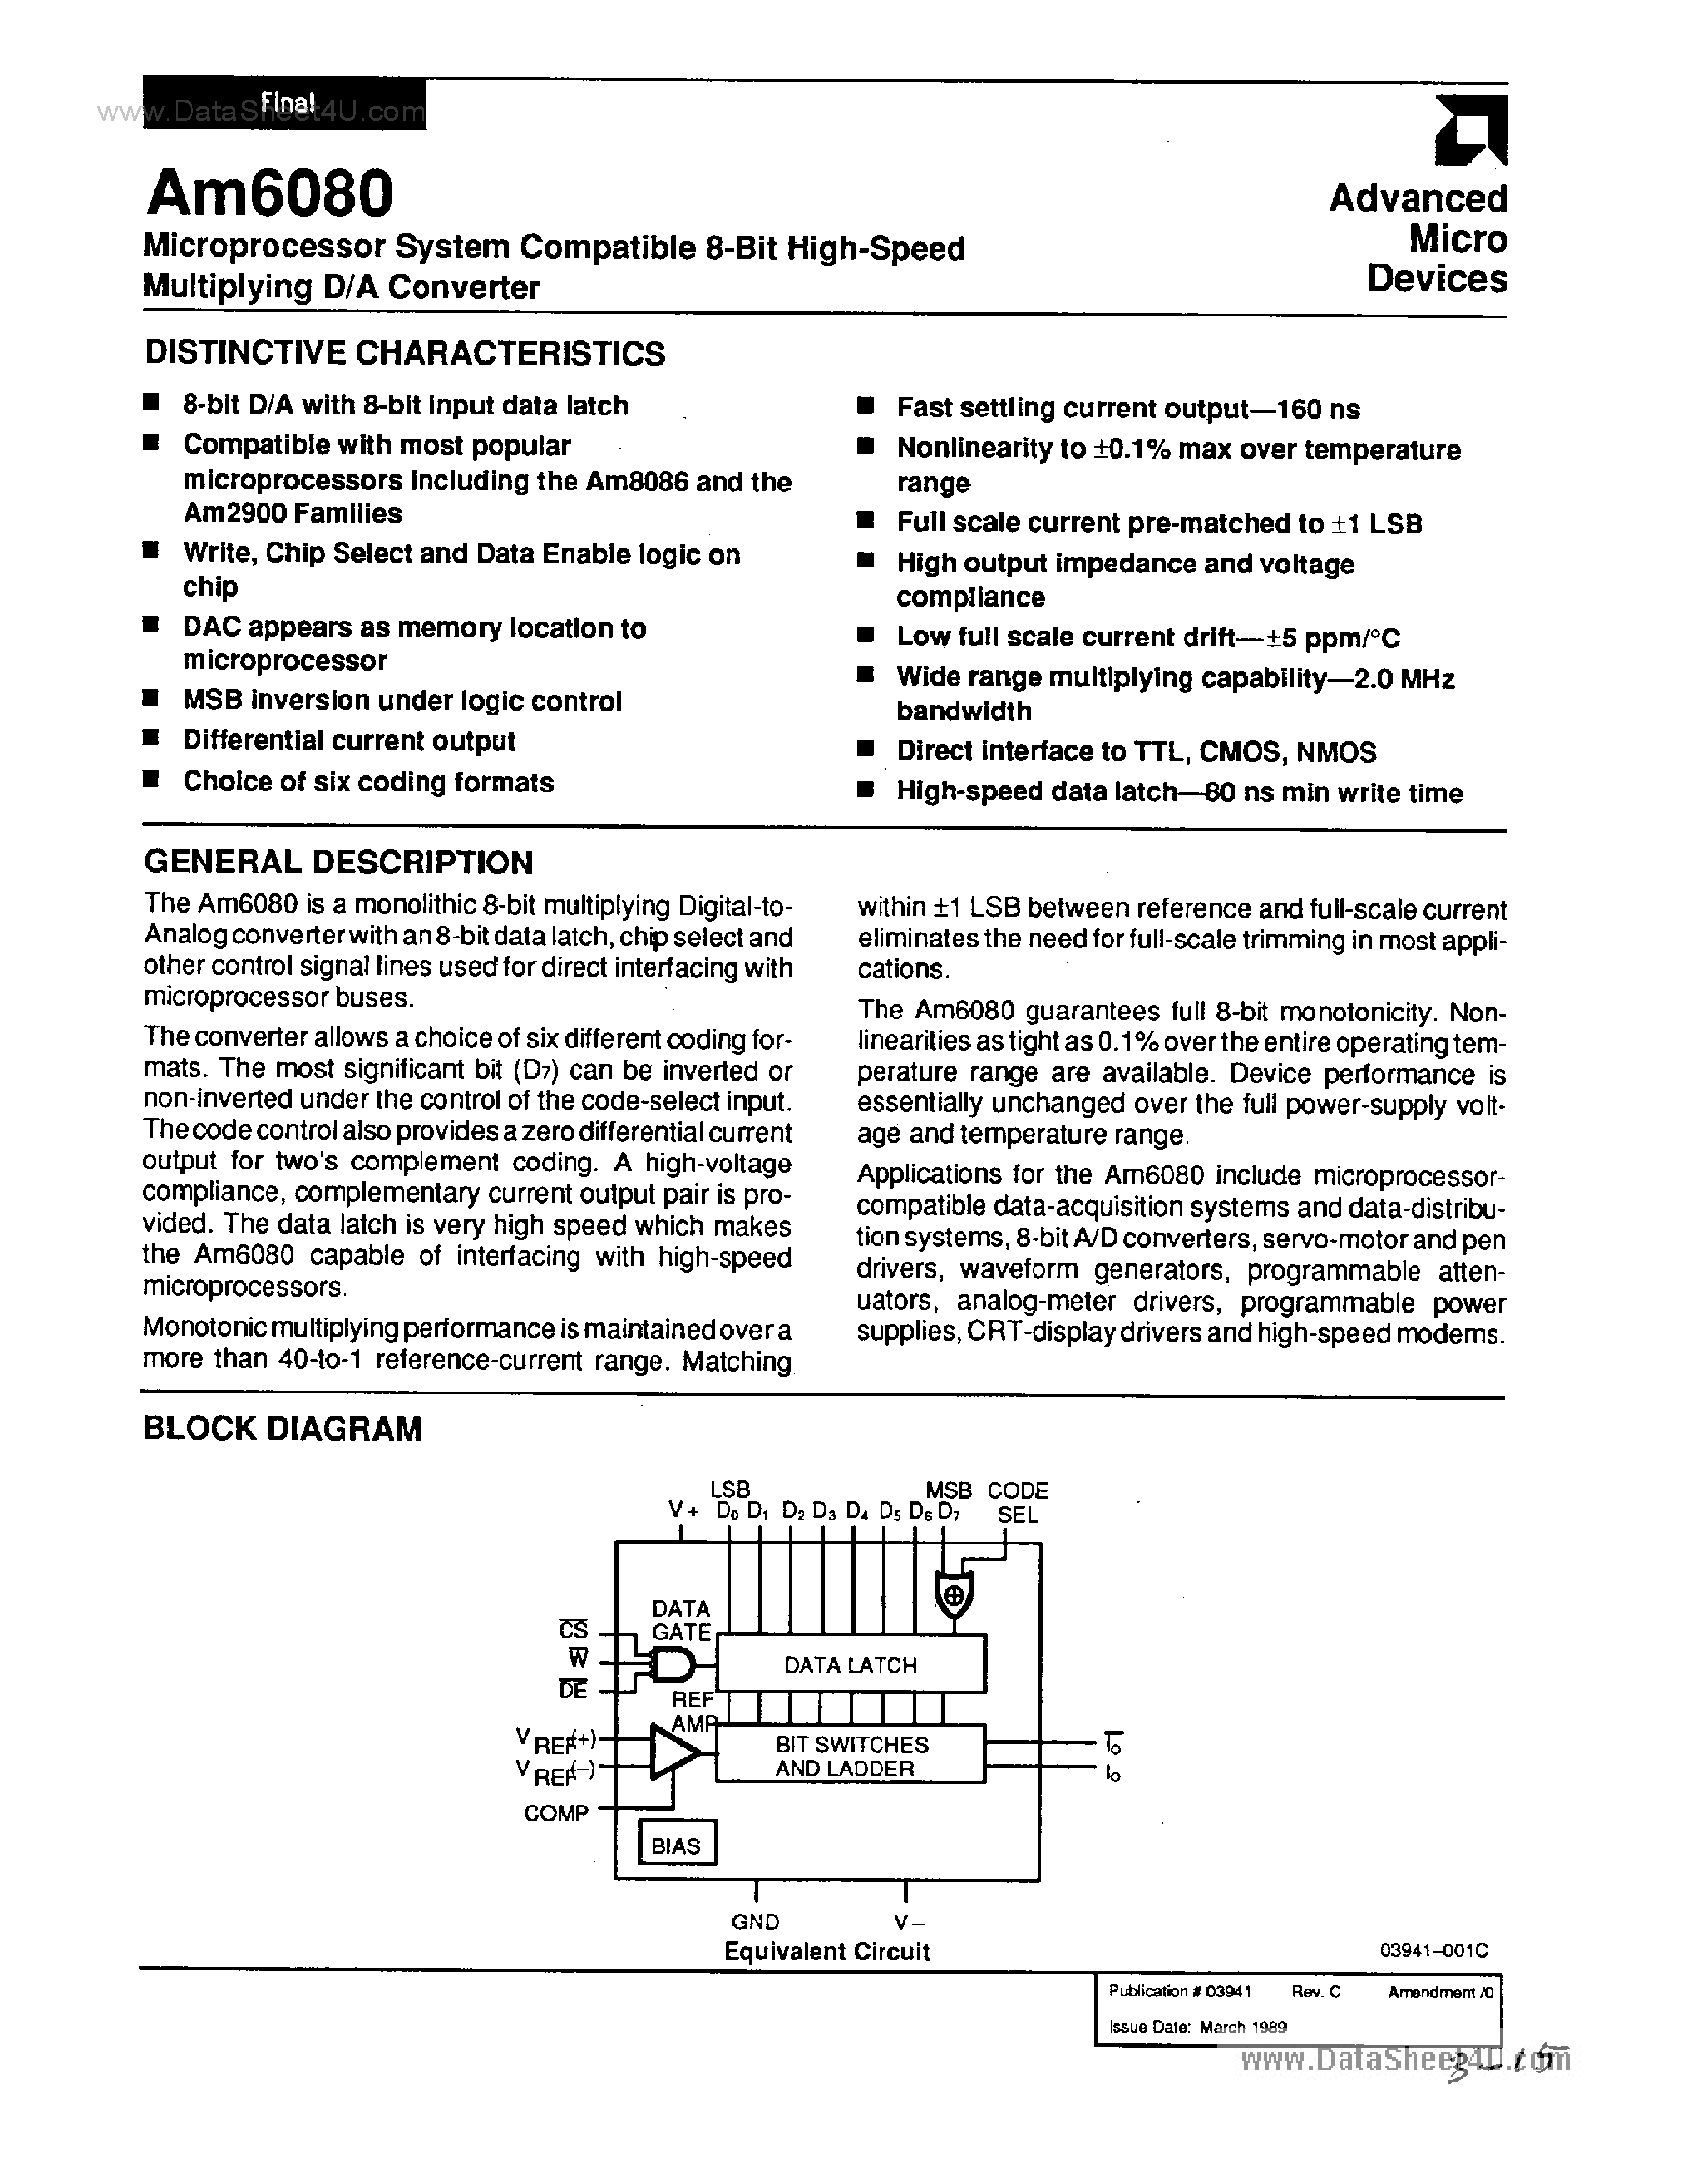 Datasheet AM6080 - Microprocessor System Compatible 8-Bit High Speed Multiplying D/A Converter page 1